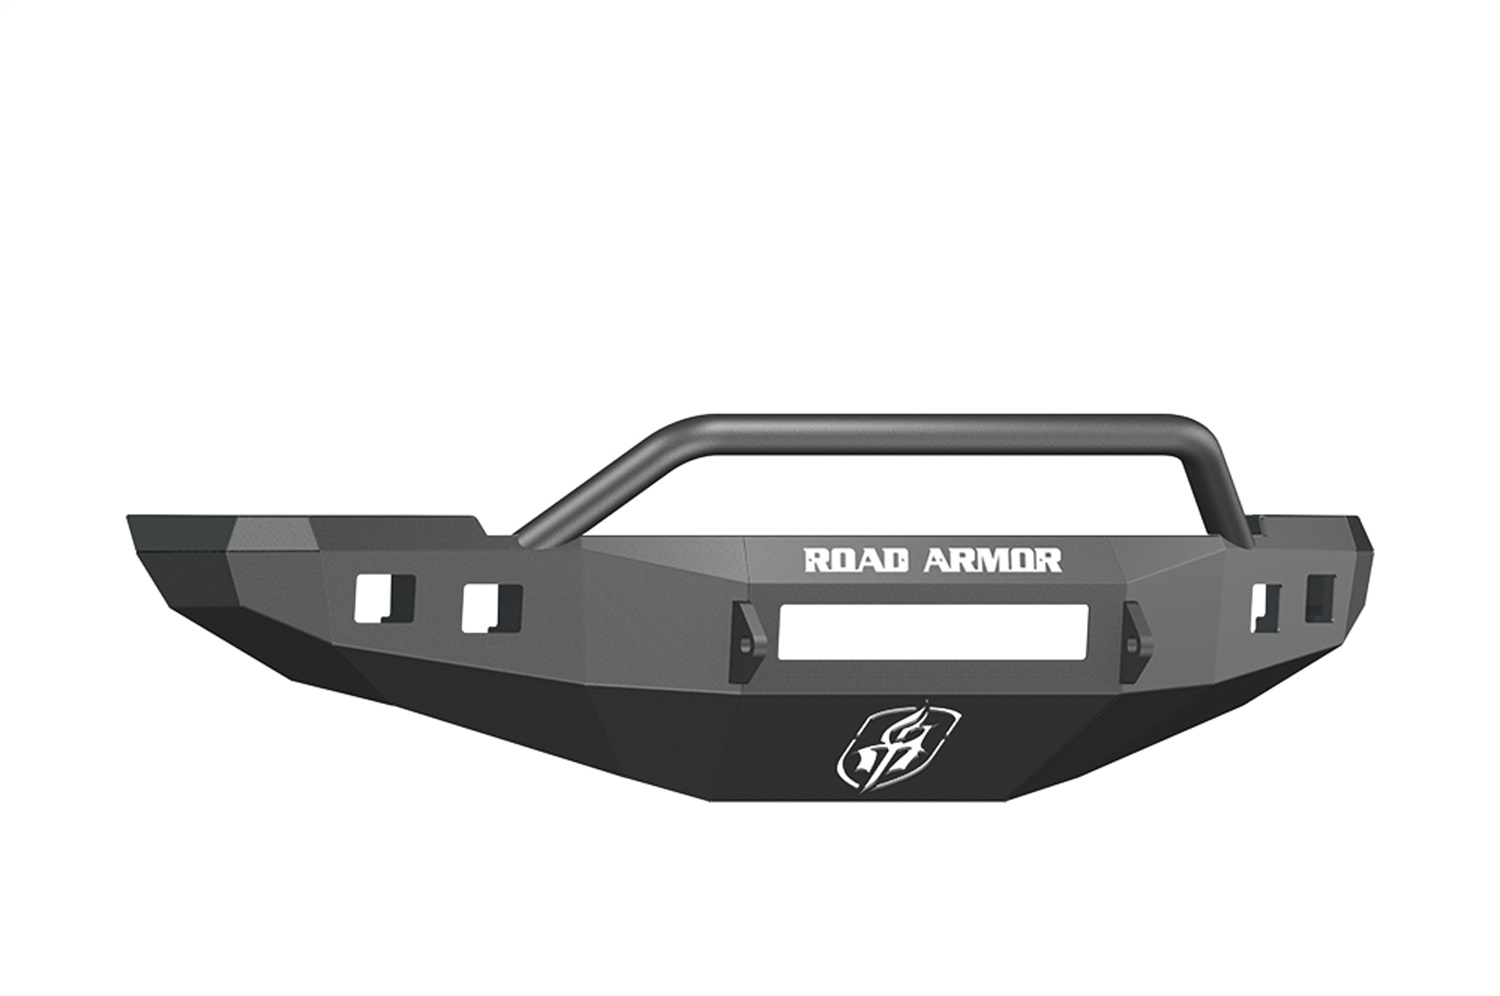 Road Armor Road Armor 408R4B-NW Front Stealth Bumper Fits 10-12 2500 3500 Ram 2500 Ram 3500